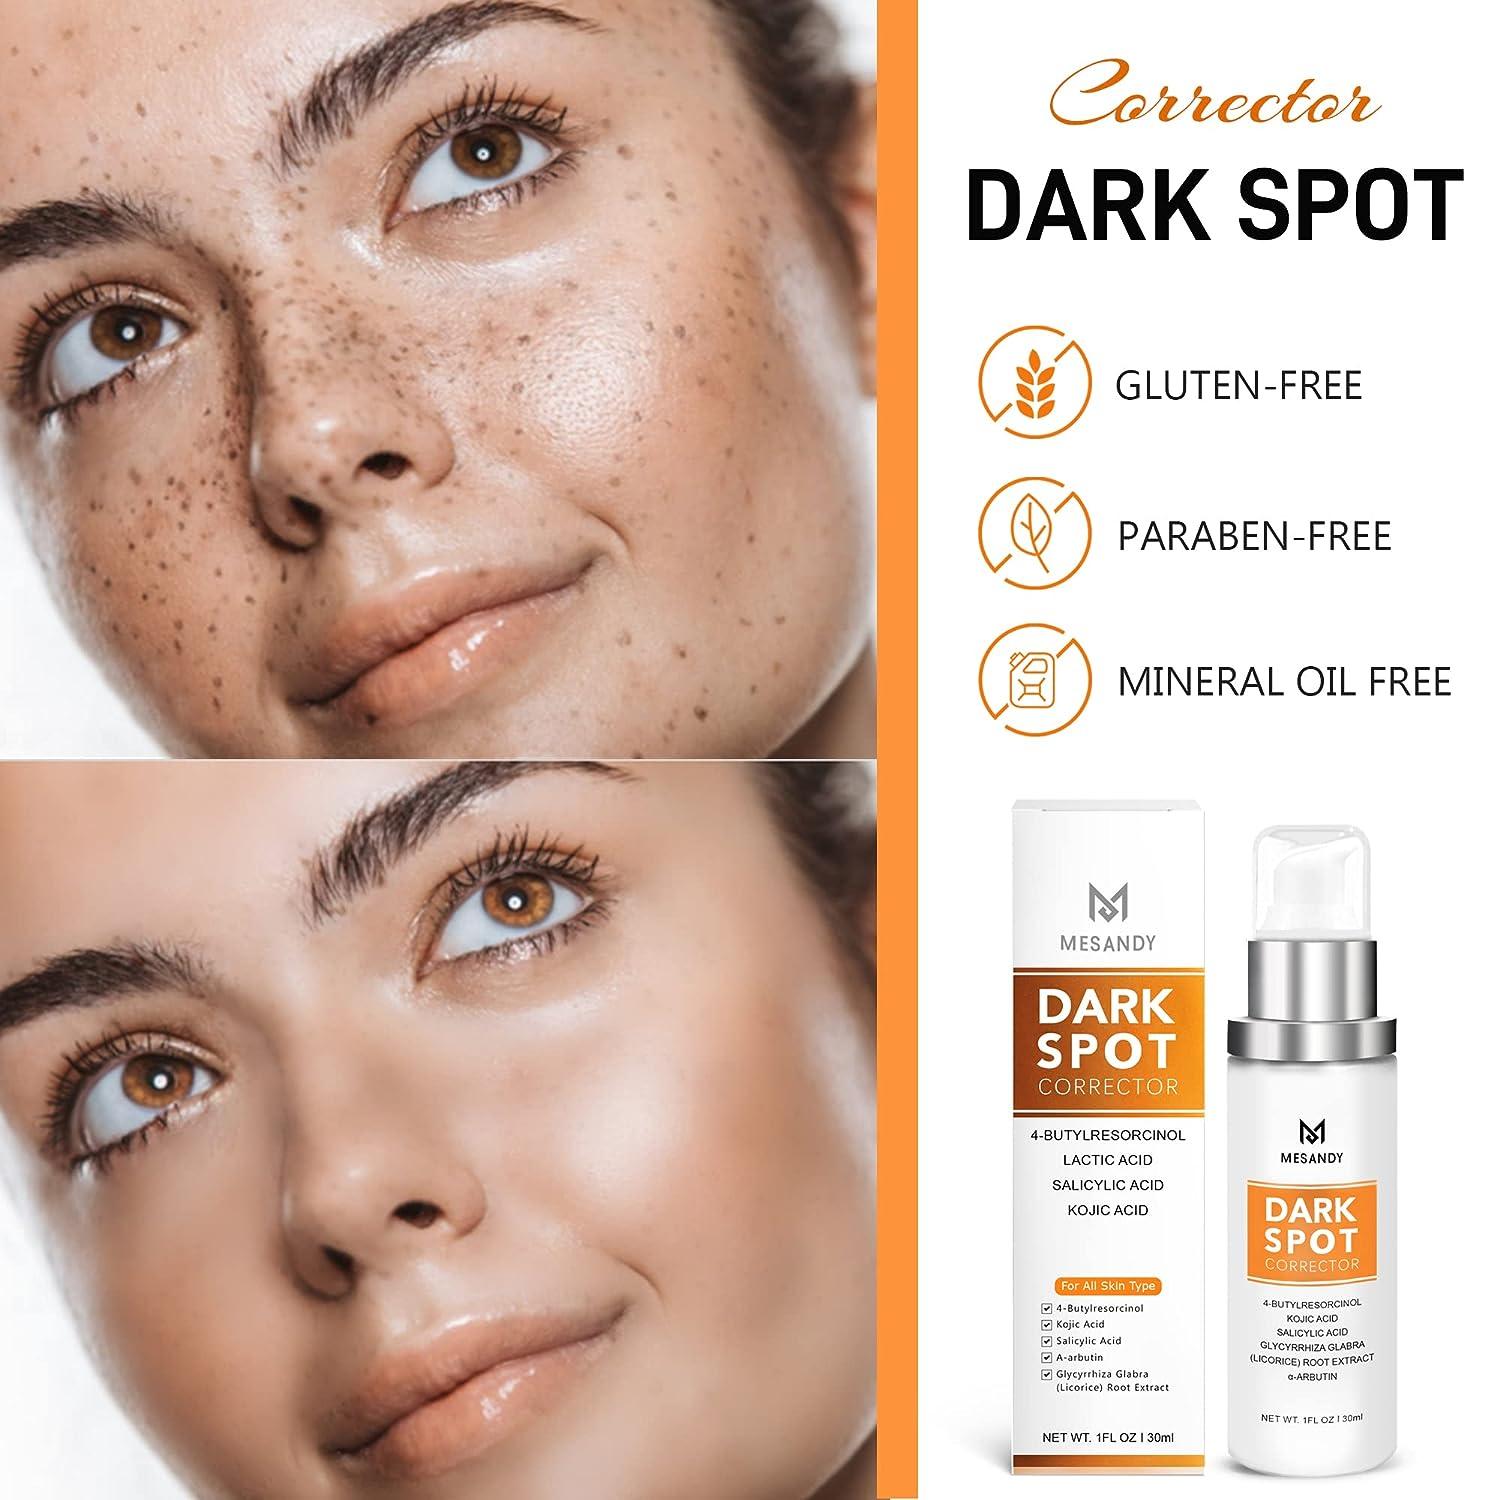 Dark Spot Remover for Face, Dark Spot Corrector for Face, Day & Night Sun  Spots, Age Spot and Freckle Remover with Vitamin C & Hyaluronic Acid ,  4-Butylresorcinol, Kojic Acid, Lactic Acid